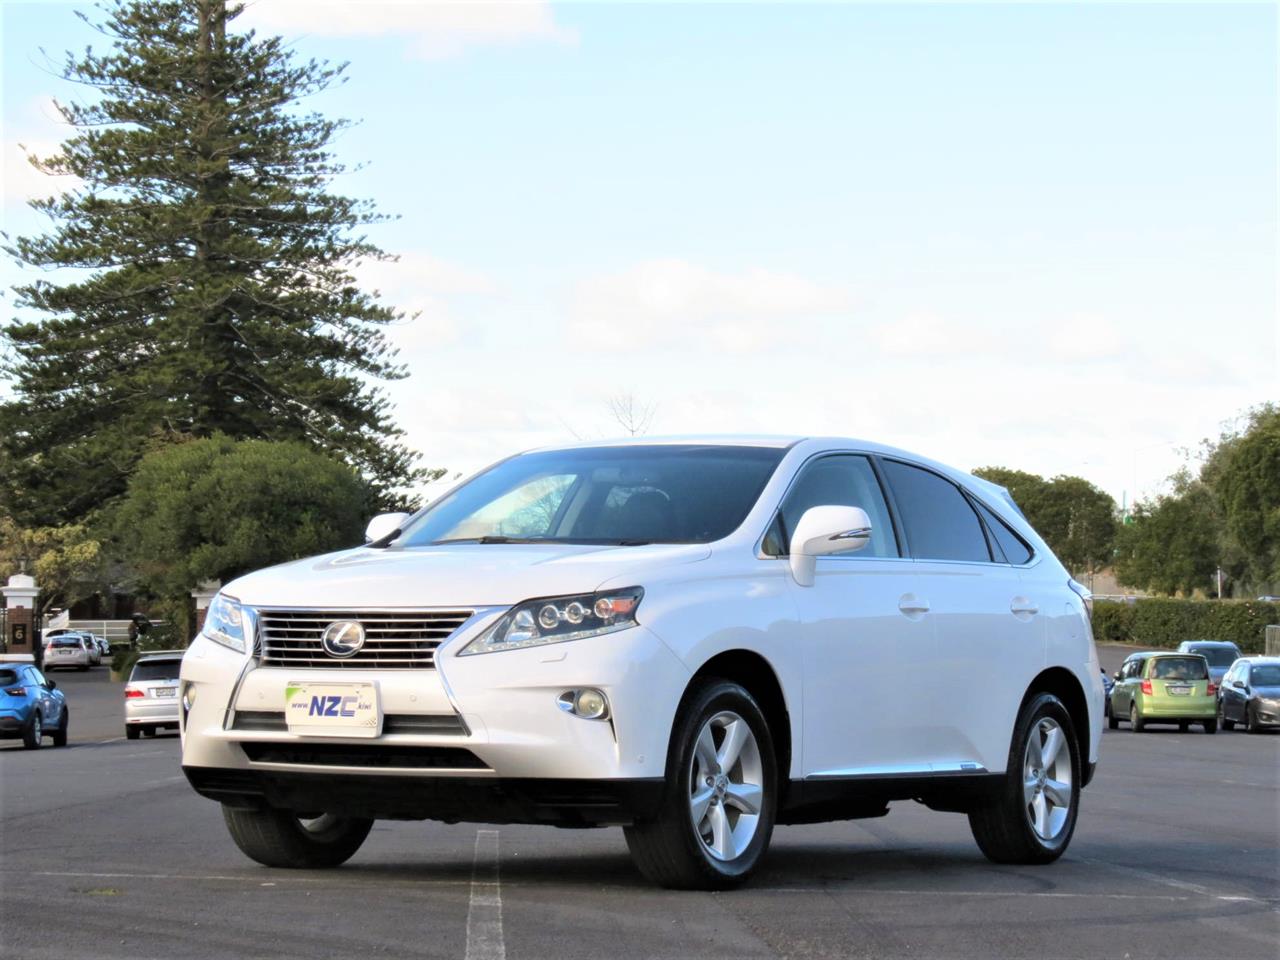 2012 Lexus RX 450H only $99 weekly